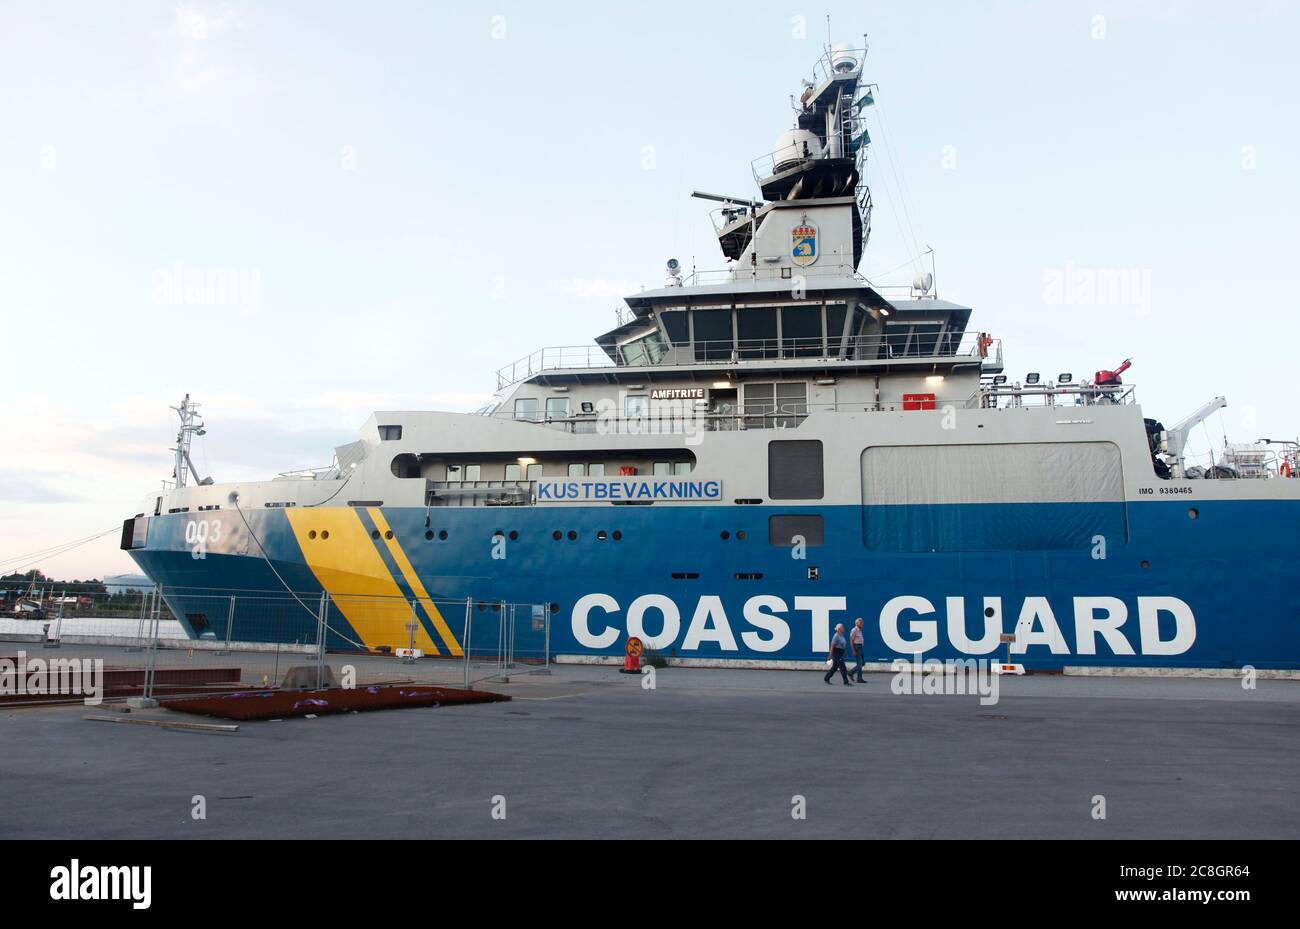 Coast Guard vessel KBV 003 Amfitrite. The ship can handle larger volumes of oil, emergency towing and extinguishing fires at sea. KBV 003 is also specially adapted to be able to assist in chemical accidents at sea. Photo Jeppe Gustafsson Stock Photo